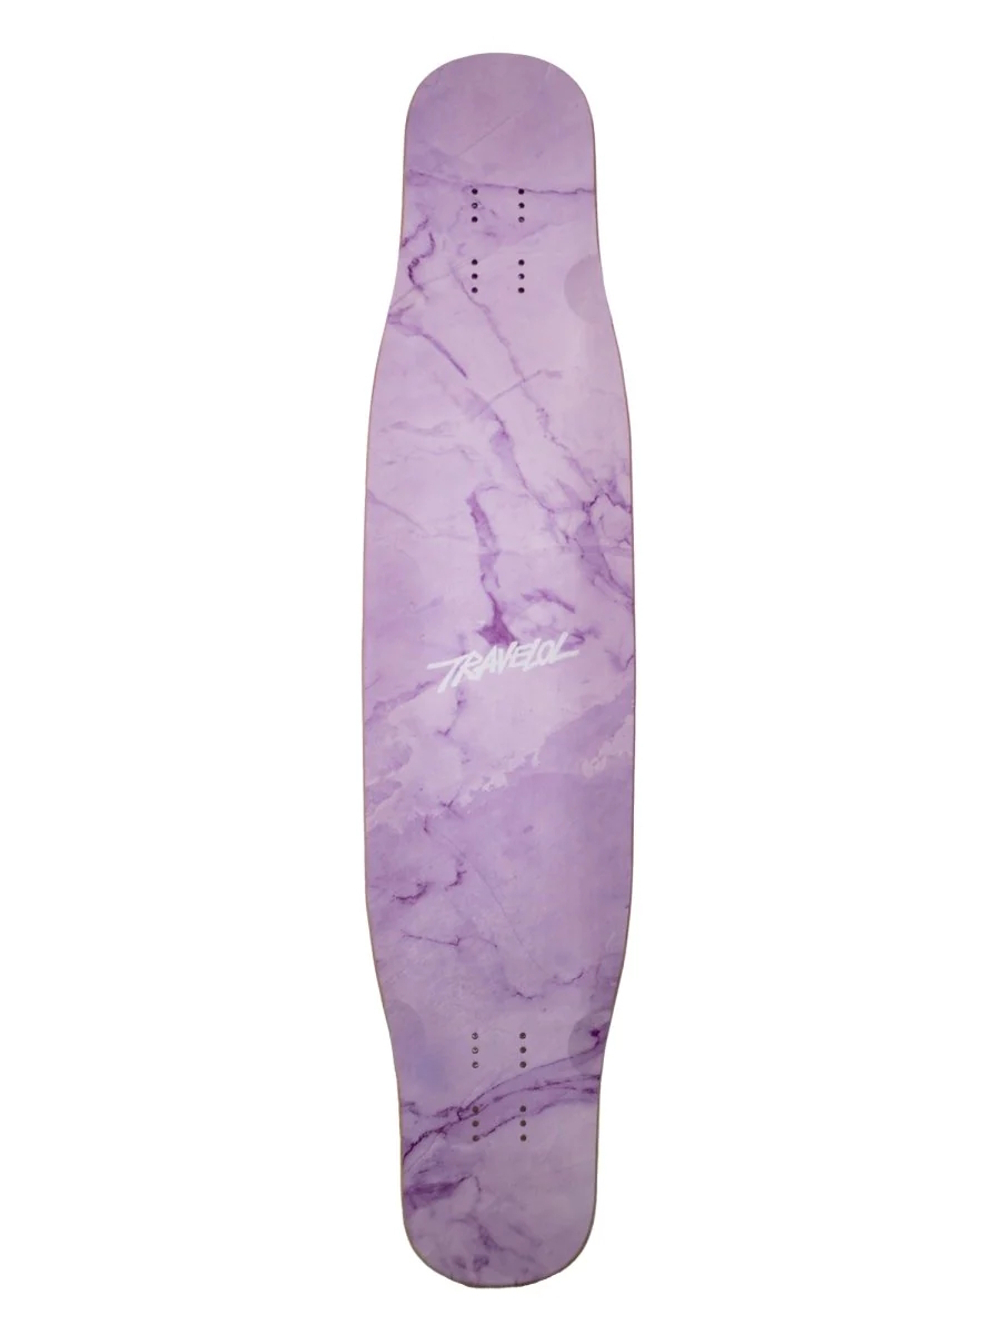 Дека Travelol Marble 43 Purple-Pink